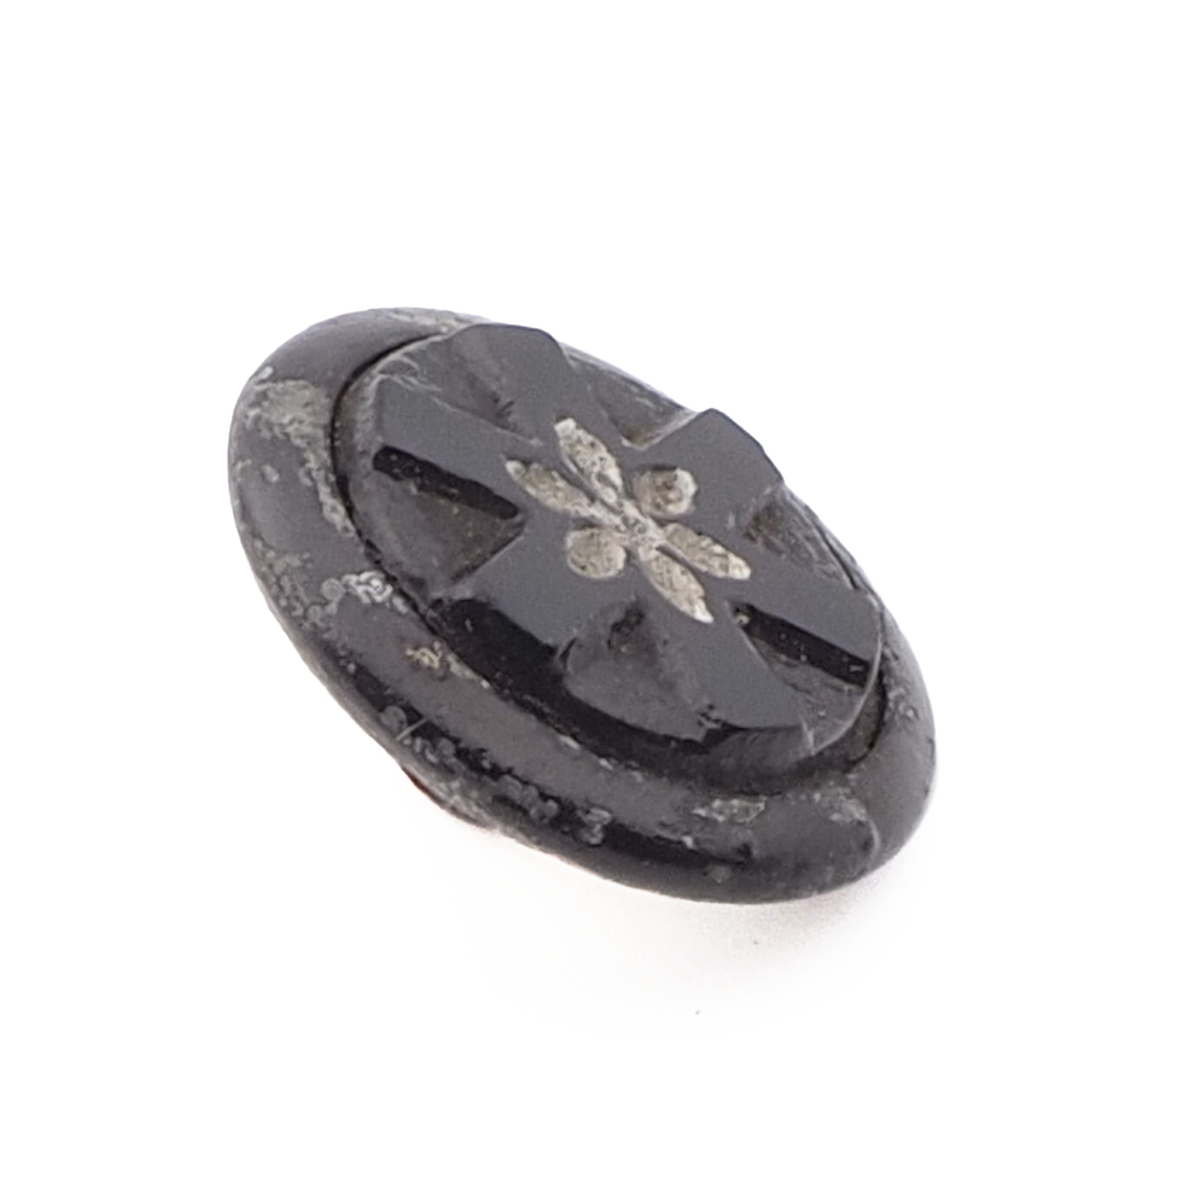 Vintage Czech 2 part metal mounted etched flower black star glass cabochon button 14mm